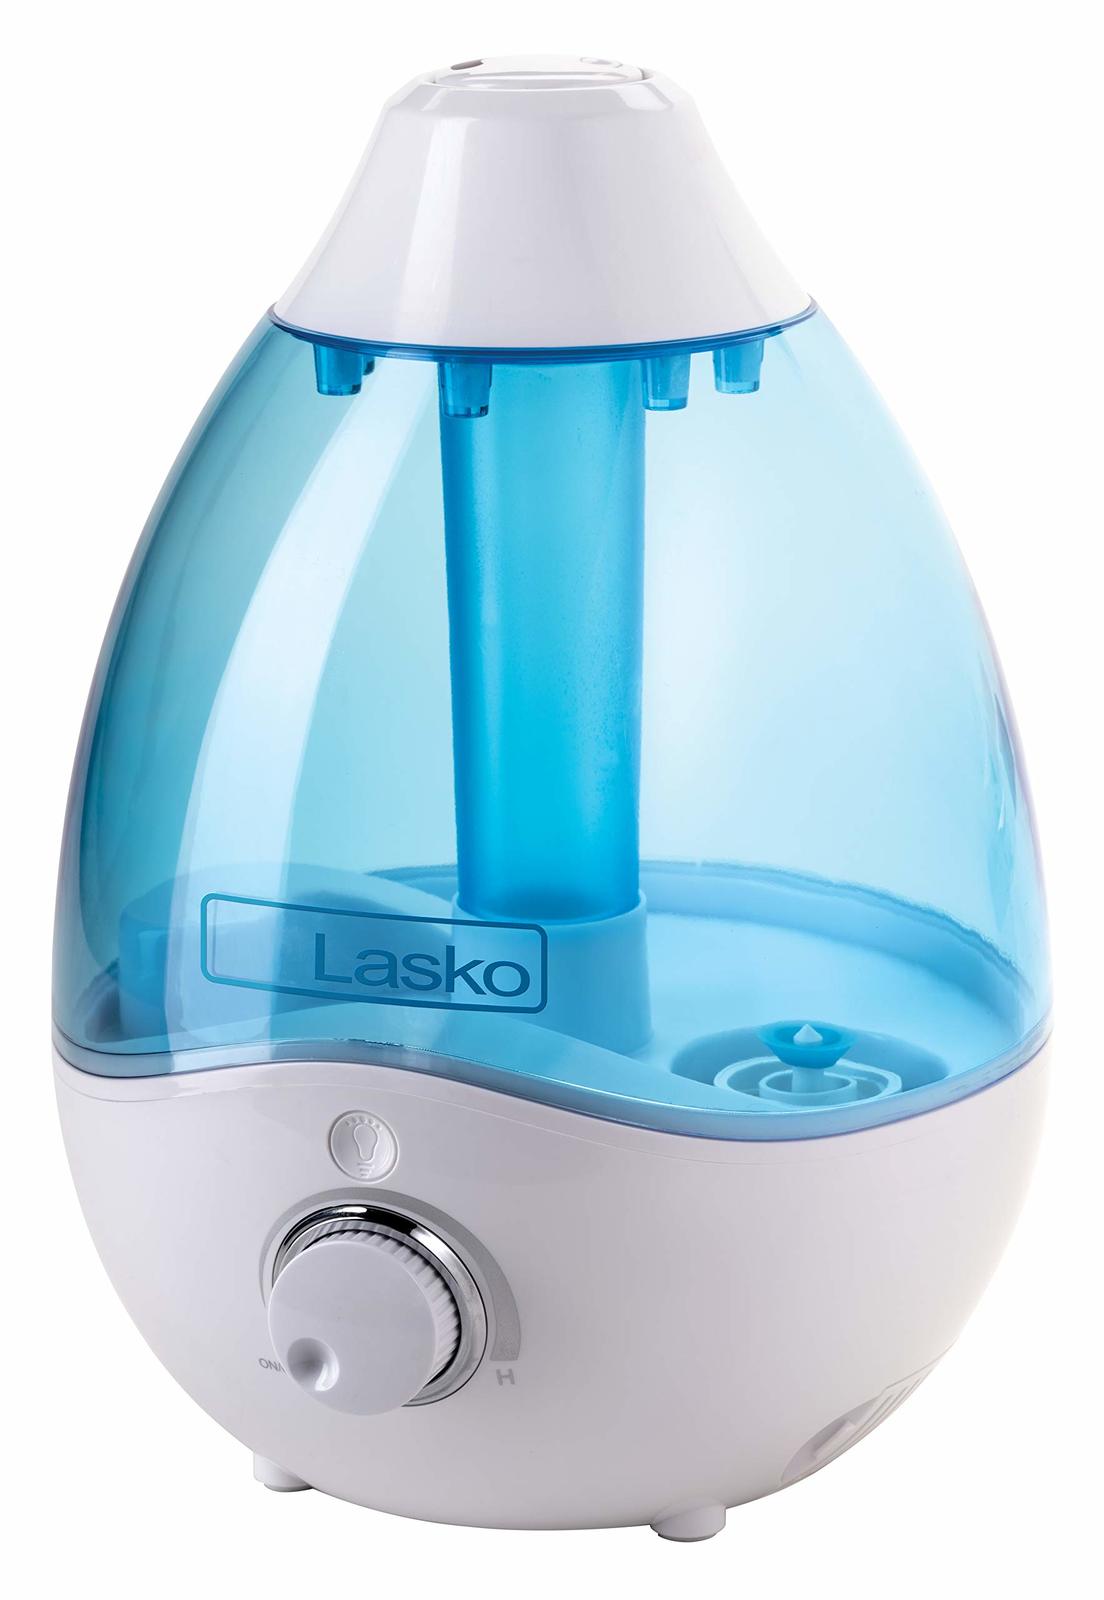 Lasko Cool Mist Humidifier with Essential Oils, Quiet and Soothing Ultrasonic Ba - $65.03